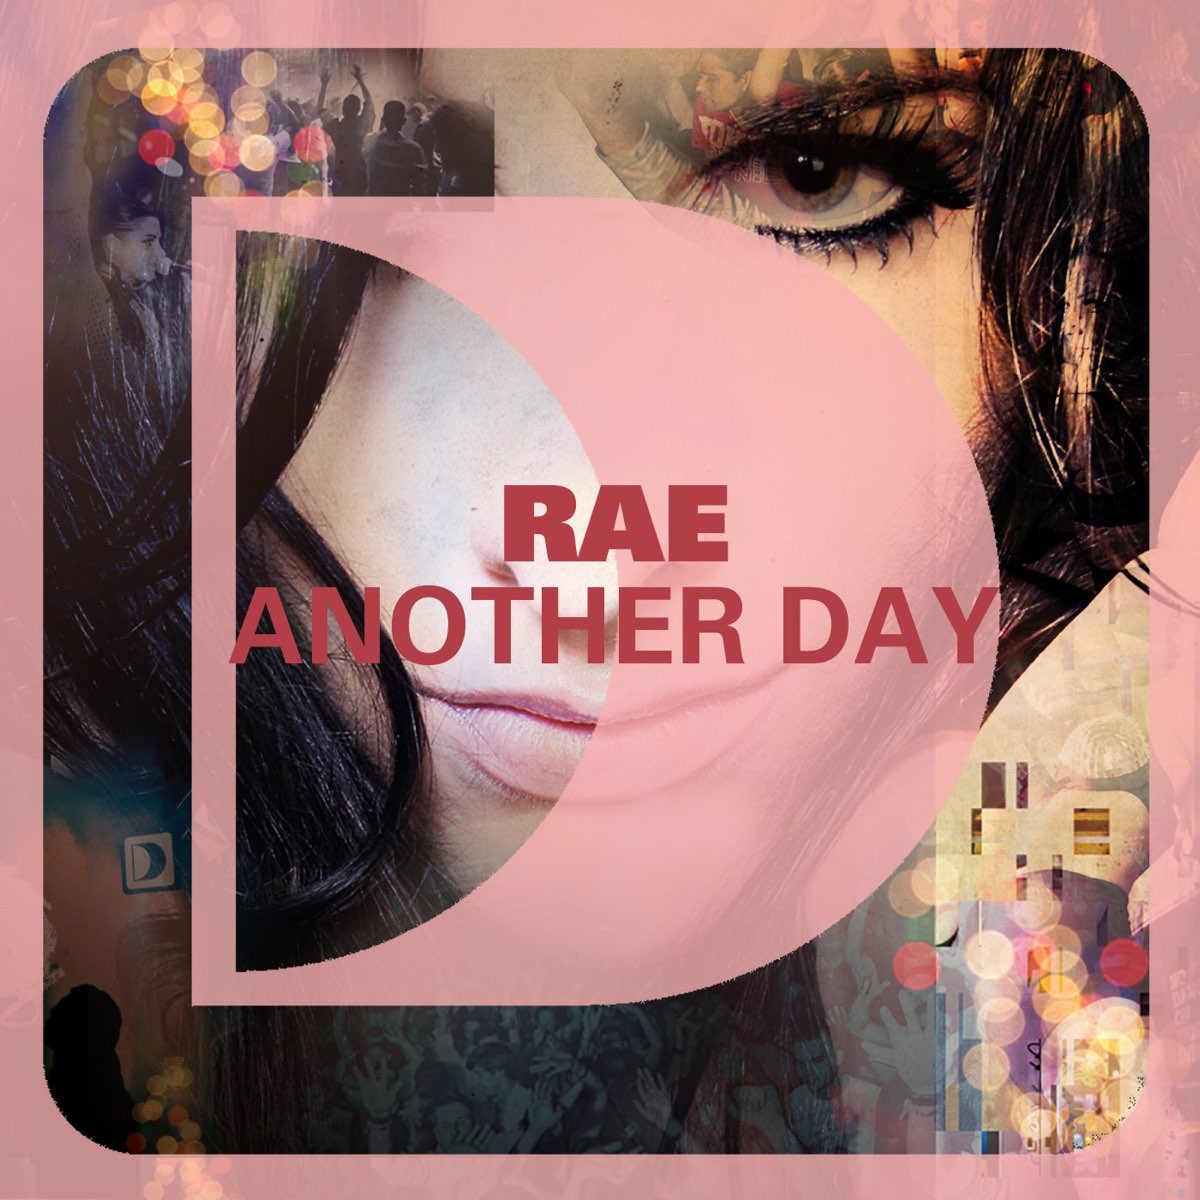 Another day текст. Песня another Day. Another Day (Single). Love another Day обложка. Певица Rae another Day.